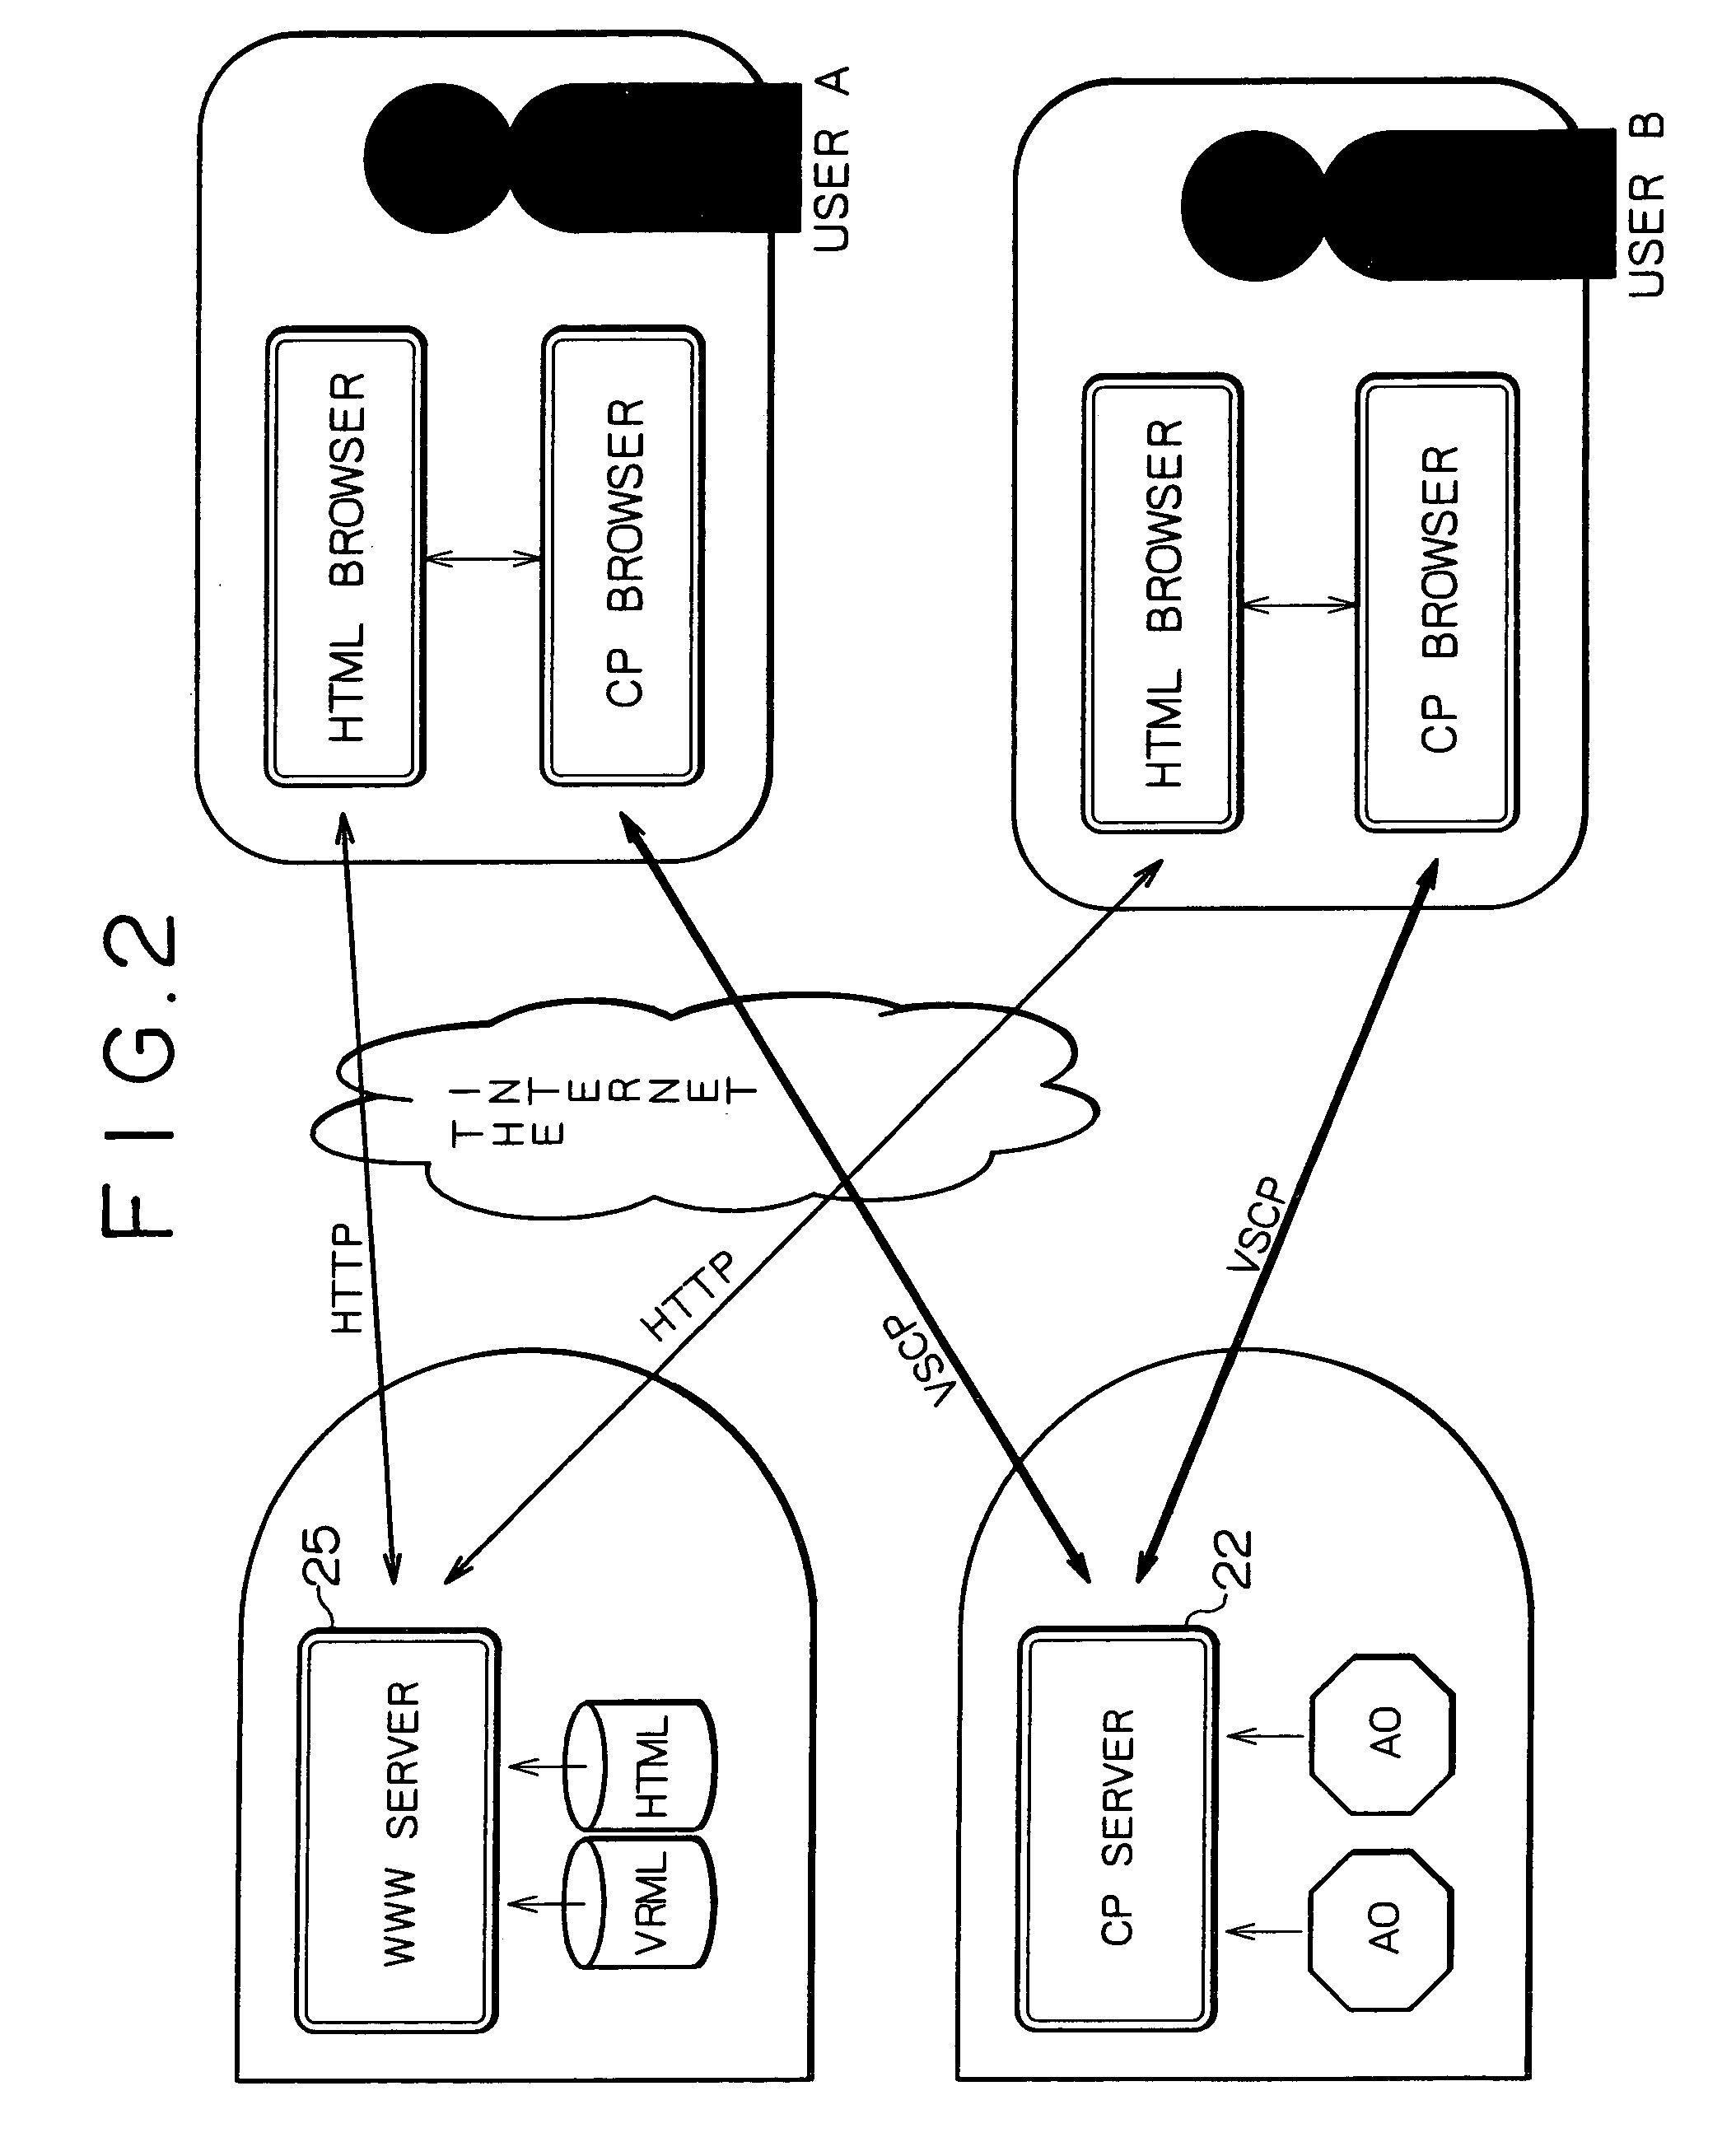 Shared virtual space conversation support system using virtual telephones